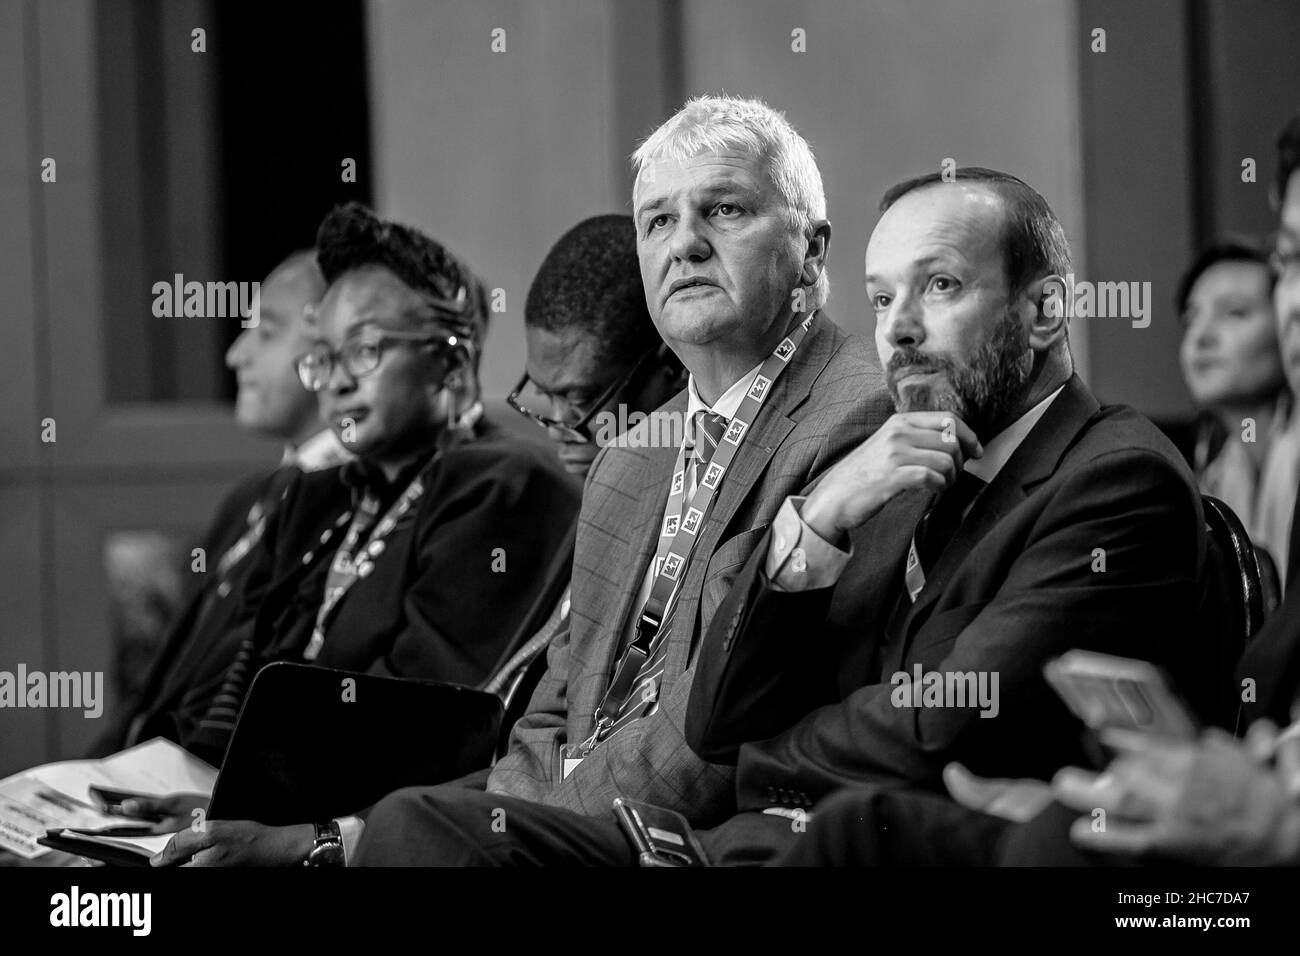 Johannesburg, South Africa - October 4, 2018: Delegates attending a business forum at conference centre Stock Photo